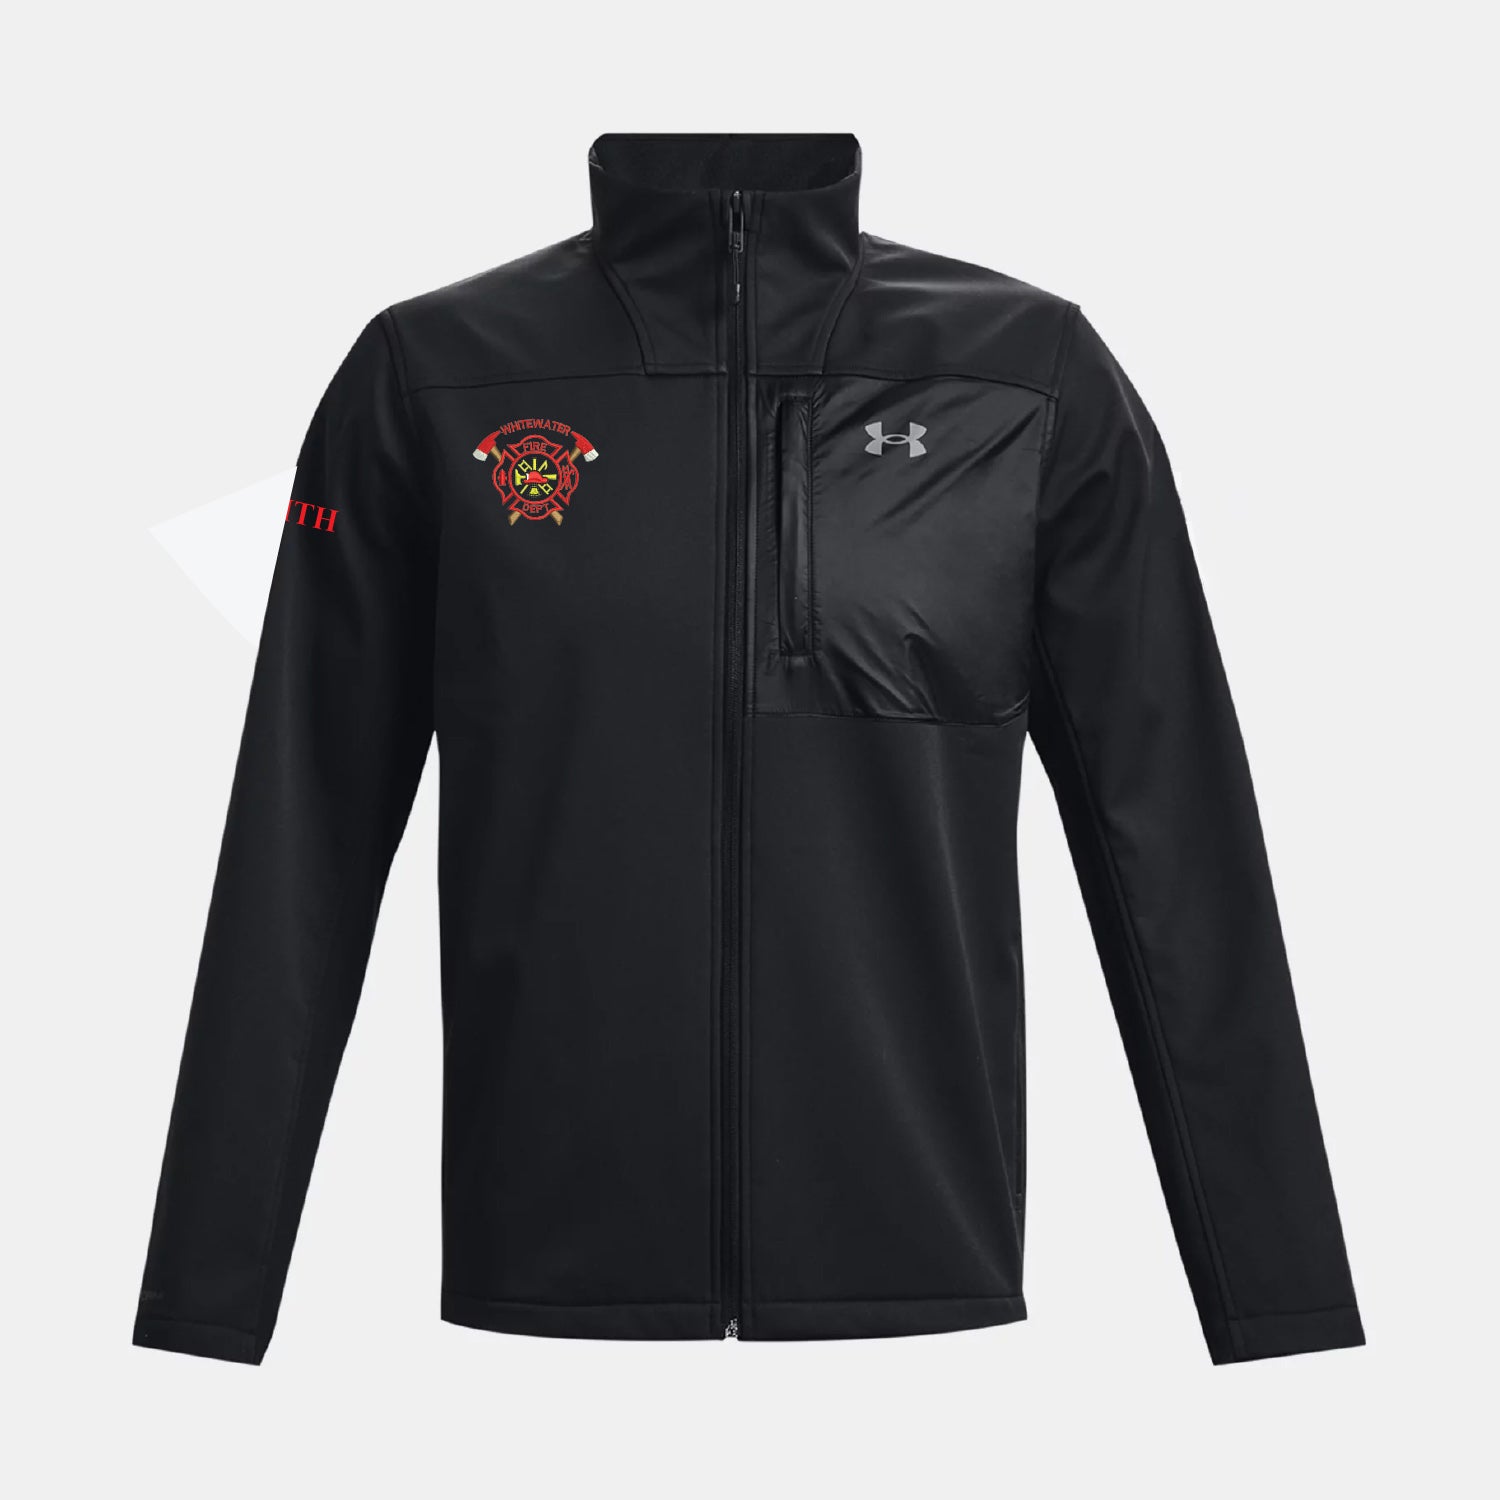 WWFD - Embroidered Under Armour Men's ColdGear® Infrared Shield 2.0 Jacket